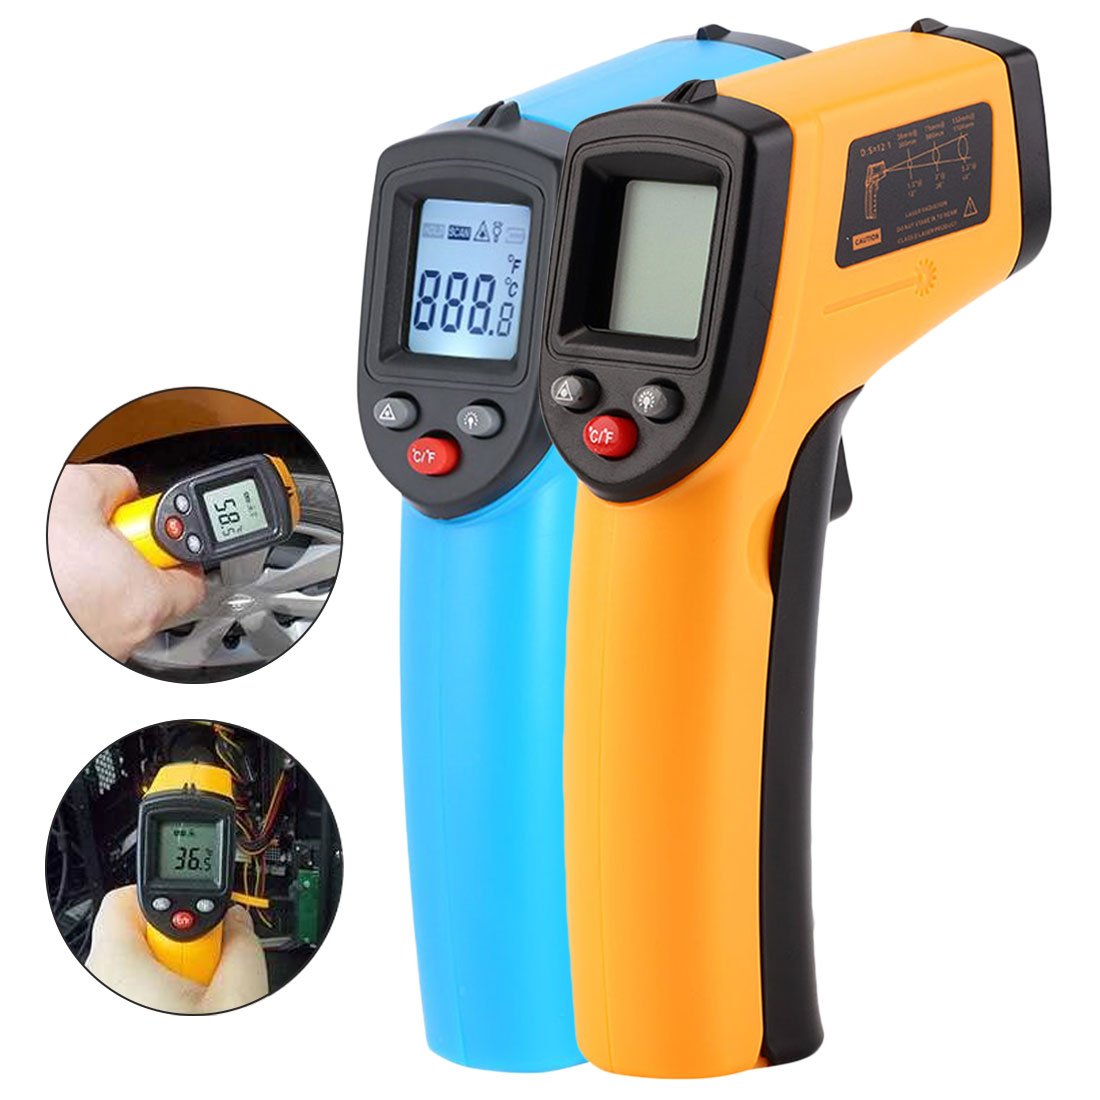 https://www.donshopping.com/wp-content/uploads/2020/01/Digital-GM320-Infrared-Thermometer-Non-Contact-Infrared-Thermometer-Pyrometer-IR-Laser-Temperature-Meter-Gun-50-380C.jpg